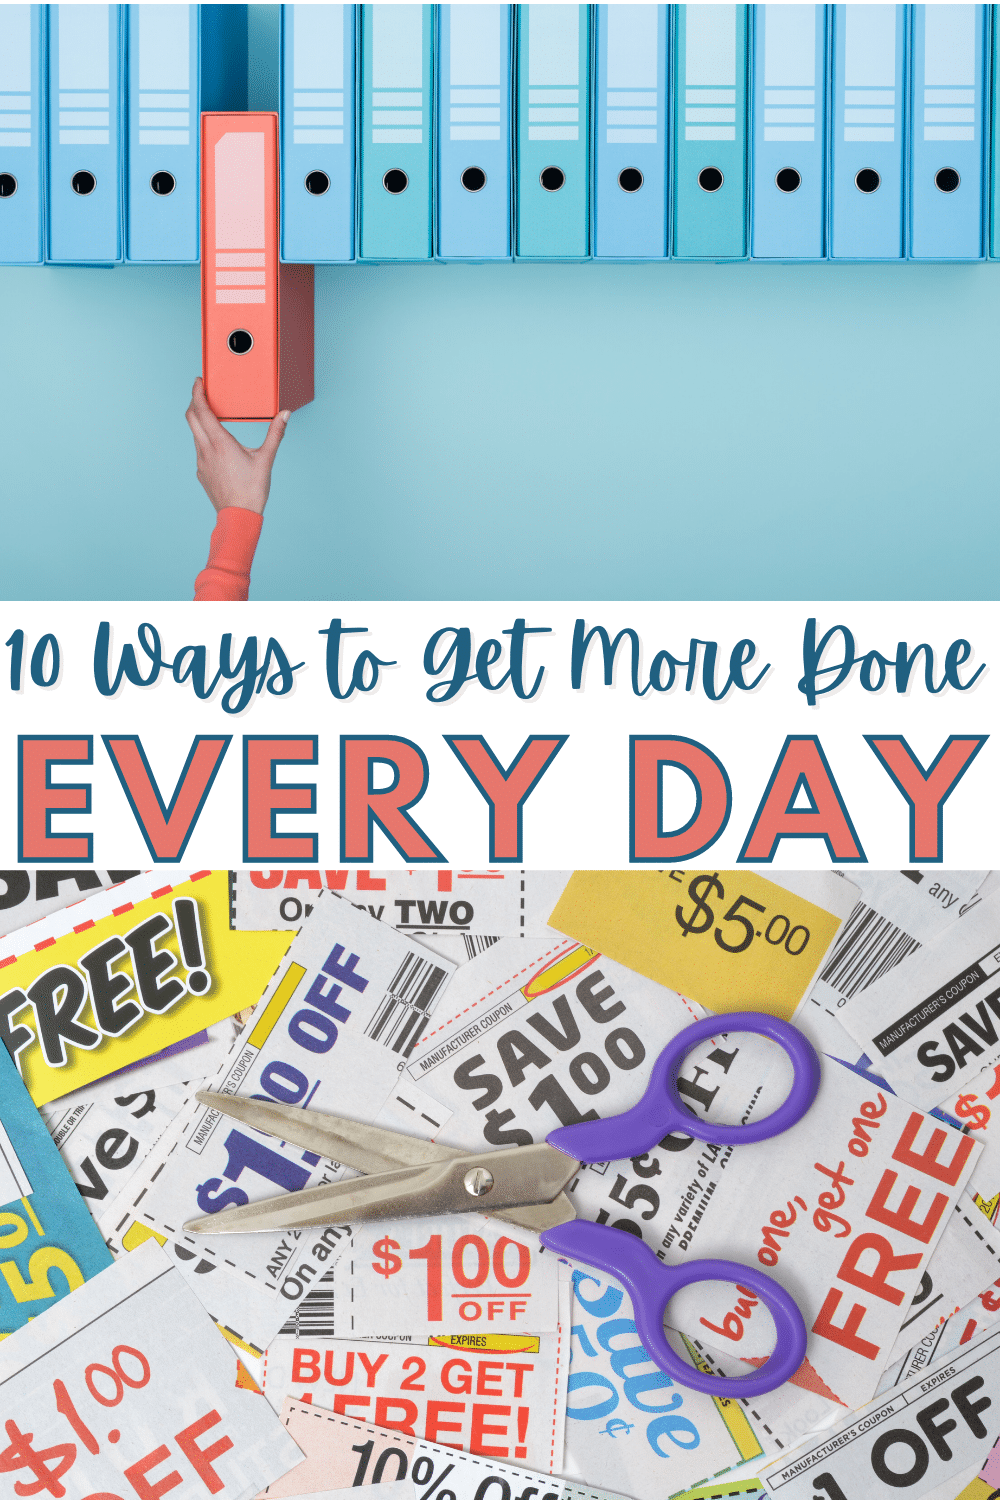 Busy moms have a lot to do and never enough time to do it all. Here are 10 easy ways to get more done every day that you can start using right now. #busymoms #getmoredone #productiveday #productivemorning via @wondermomwannab